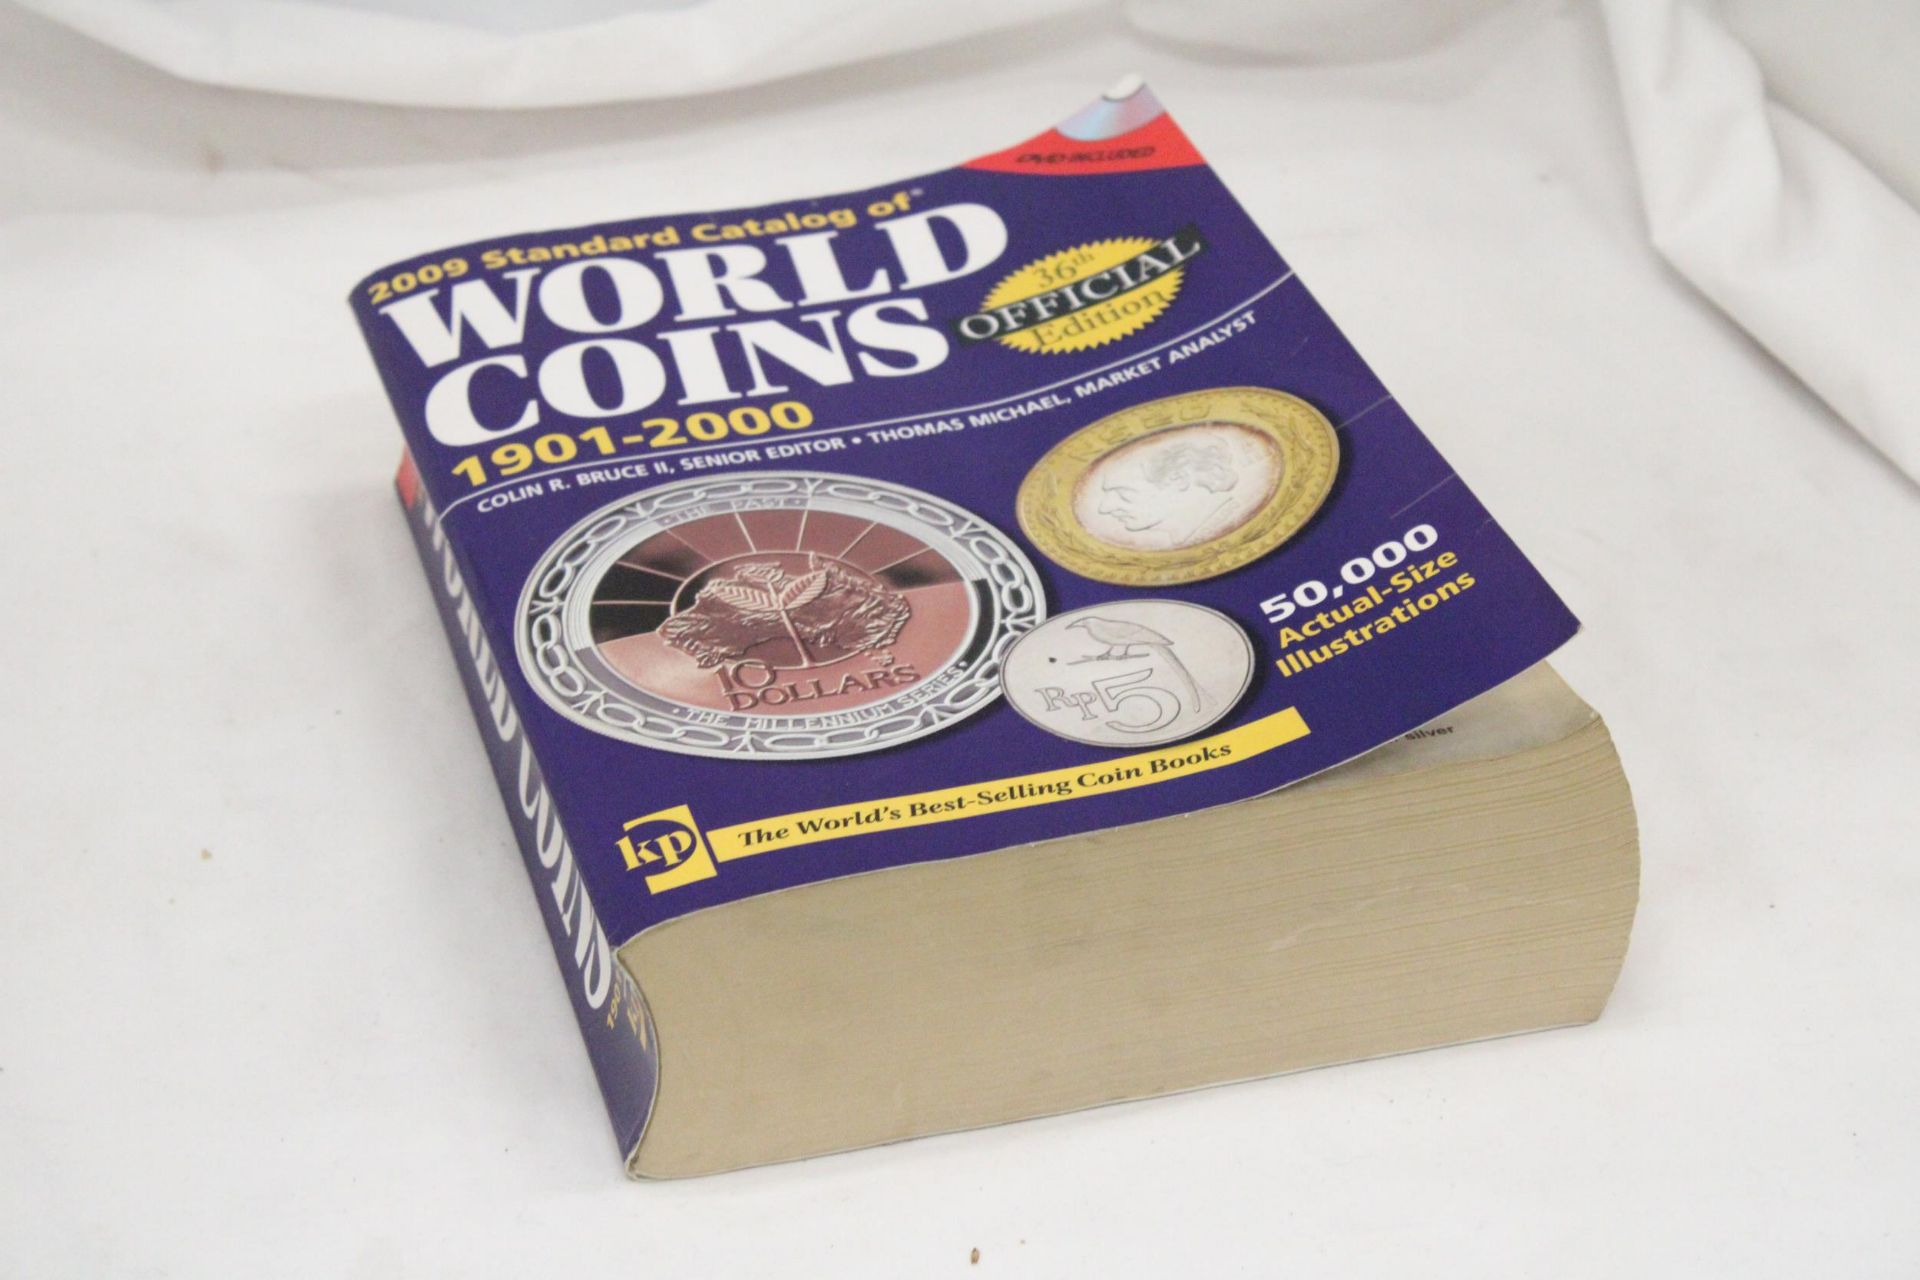 A WORLD COINS BOOK 1901-2000, OVER 2000 PAGES - PRICED 60 DOLLARS - Image 3 of 6